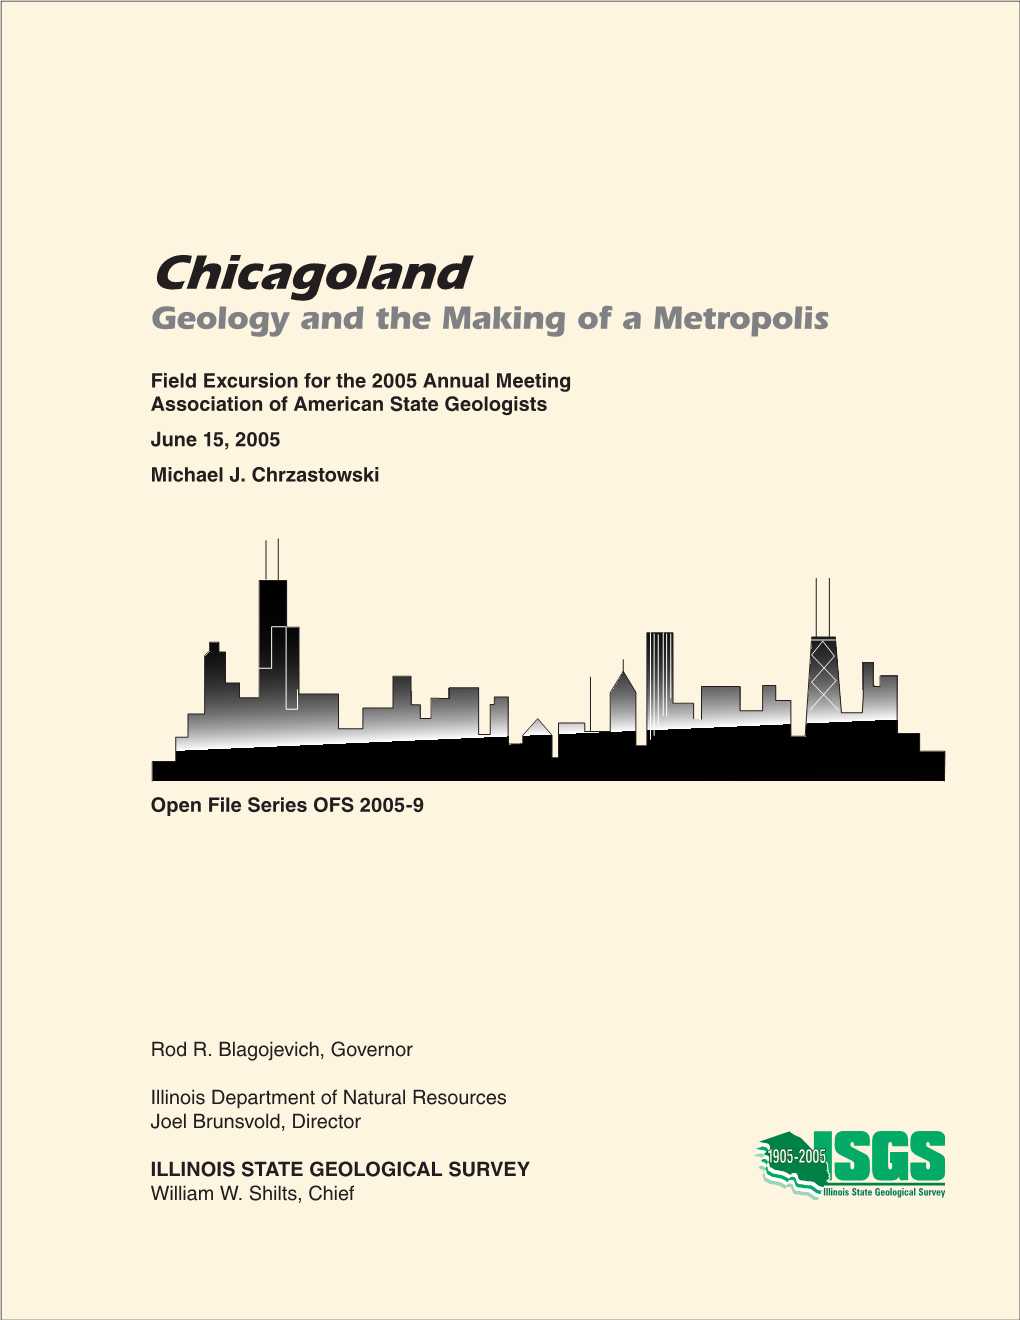 Chicagoland Geology and the Making of a Metropolis